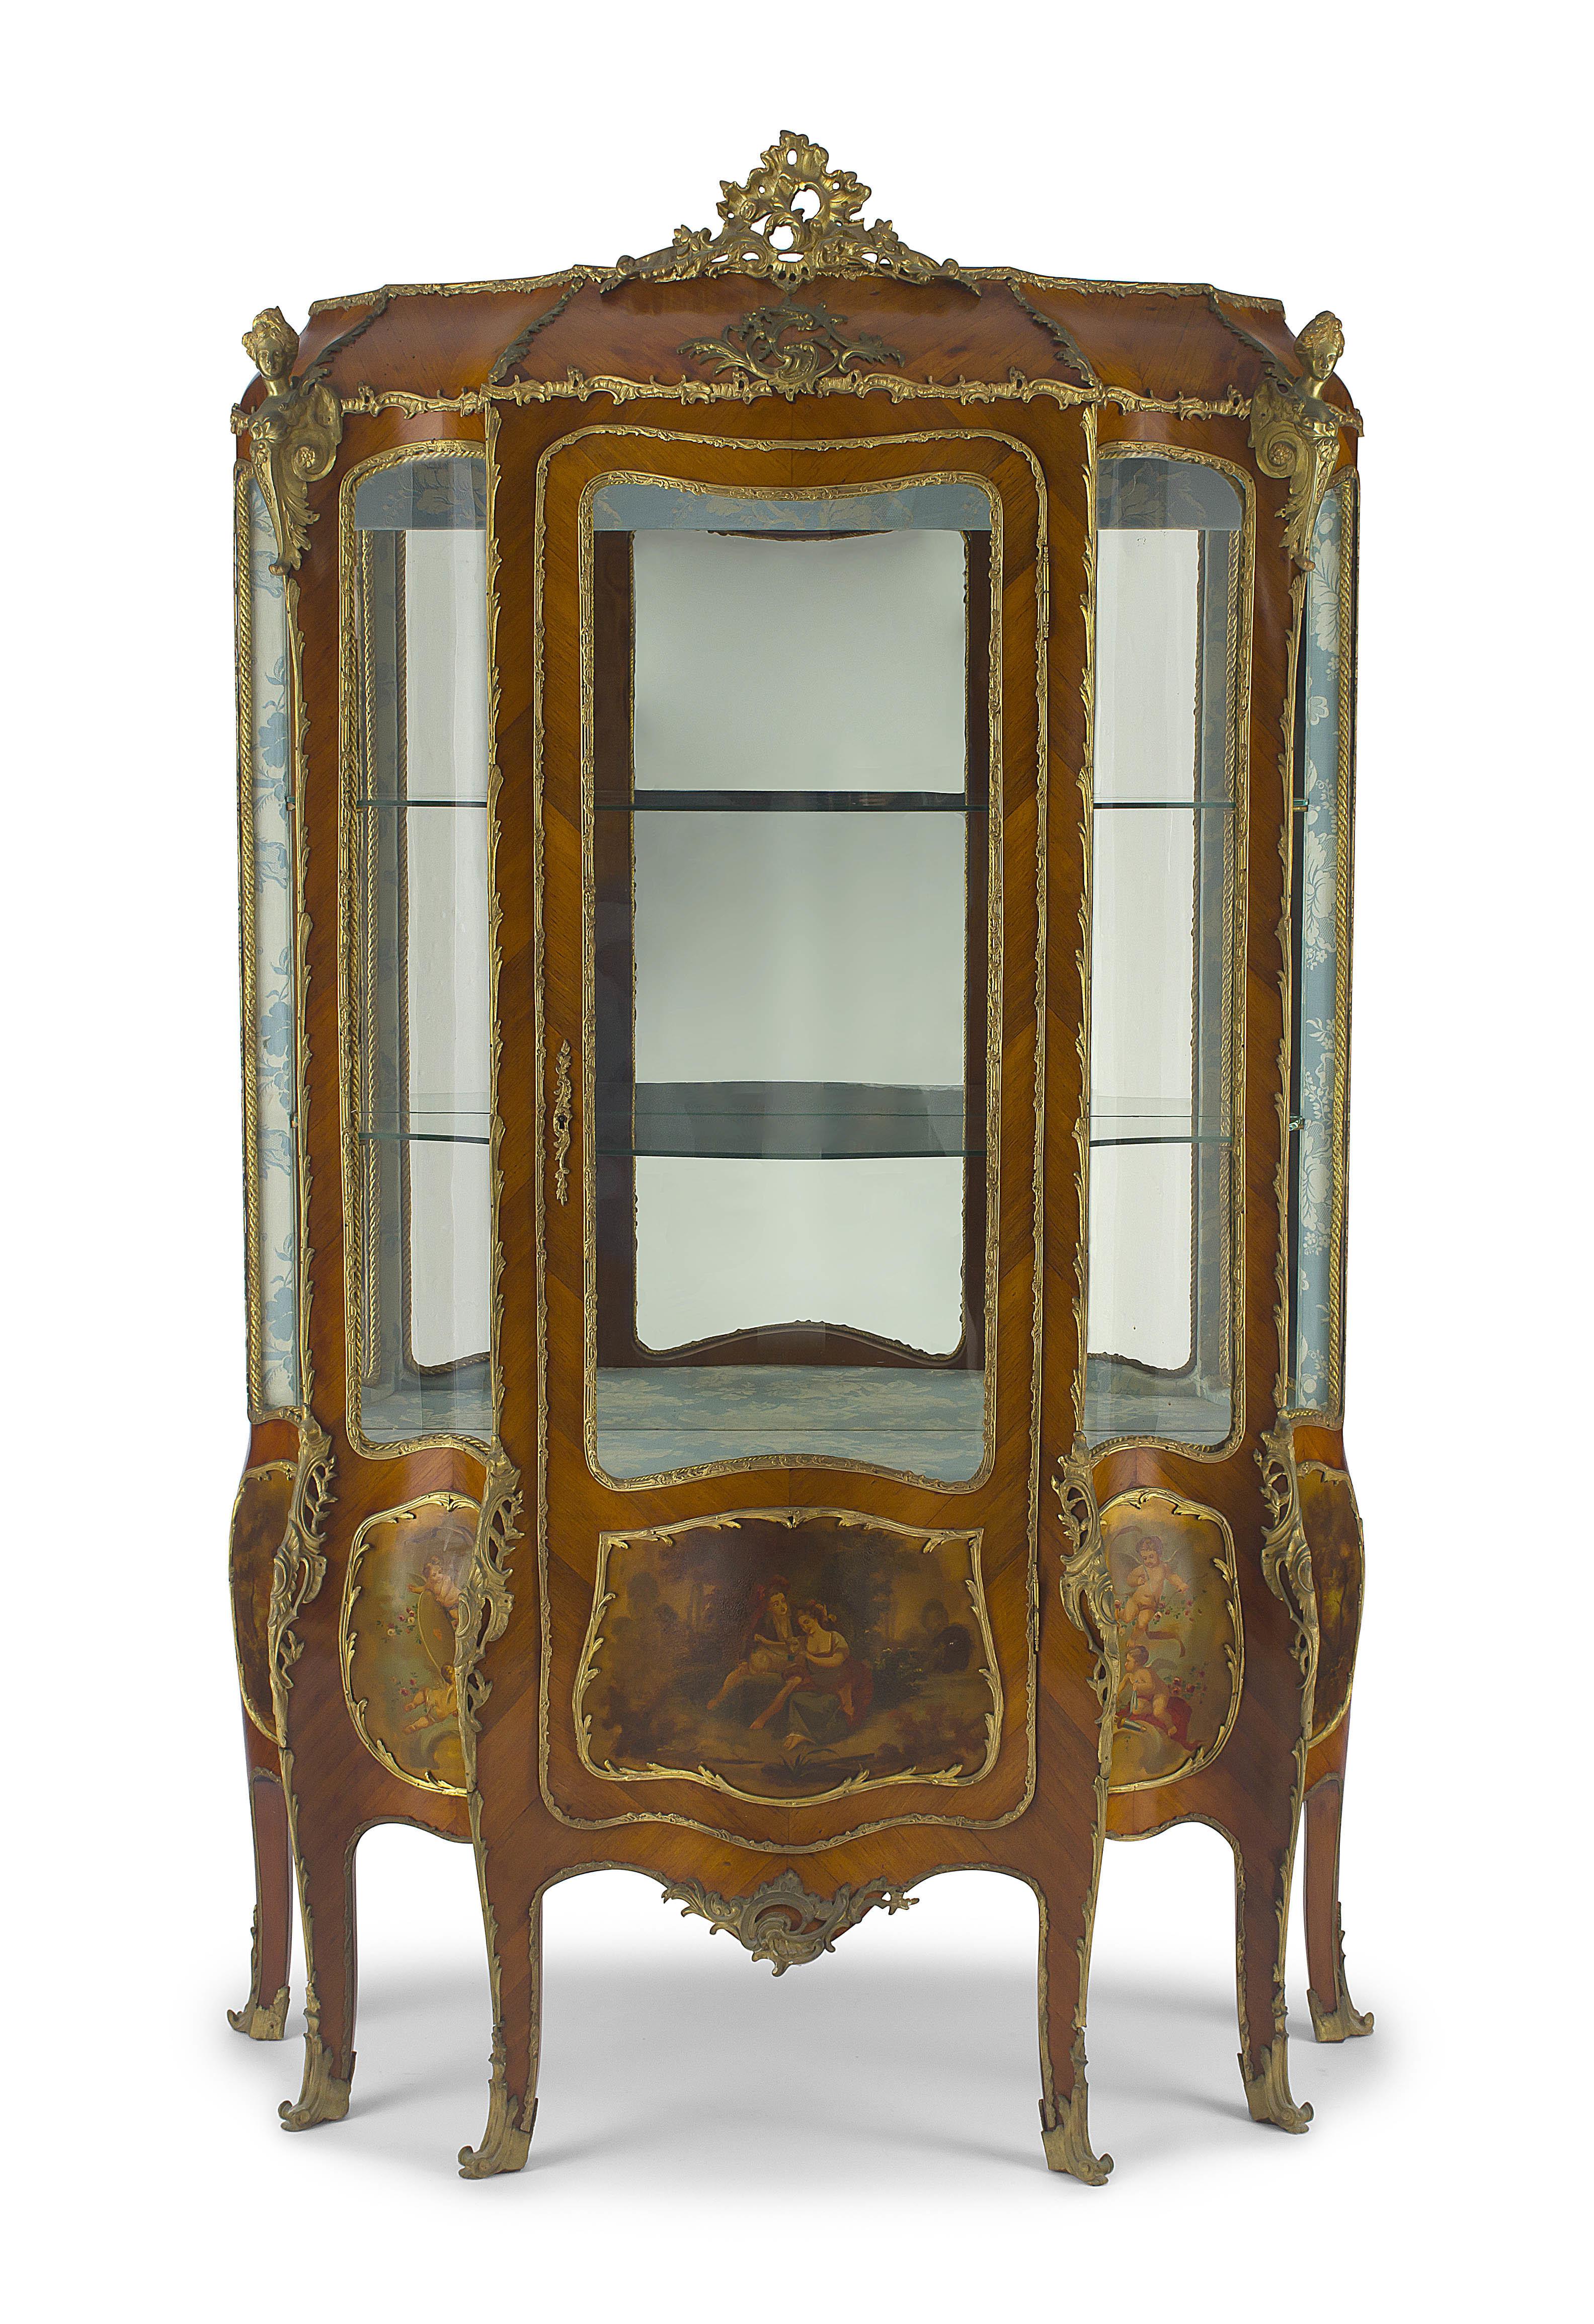 A French kingwood, Vernis Martin gilt-metal mounted vitrine cabinet, late 19th century